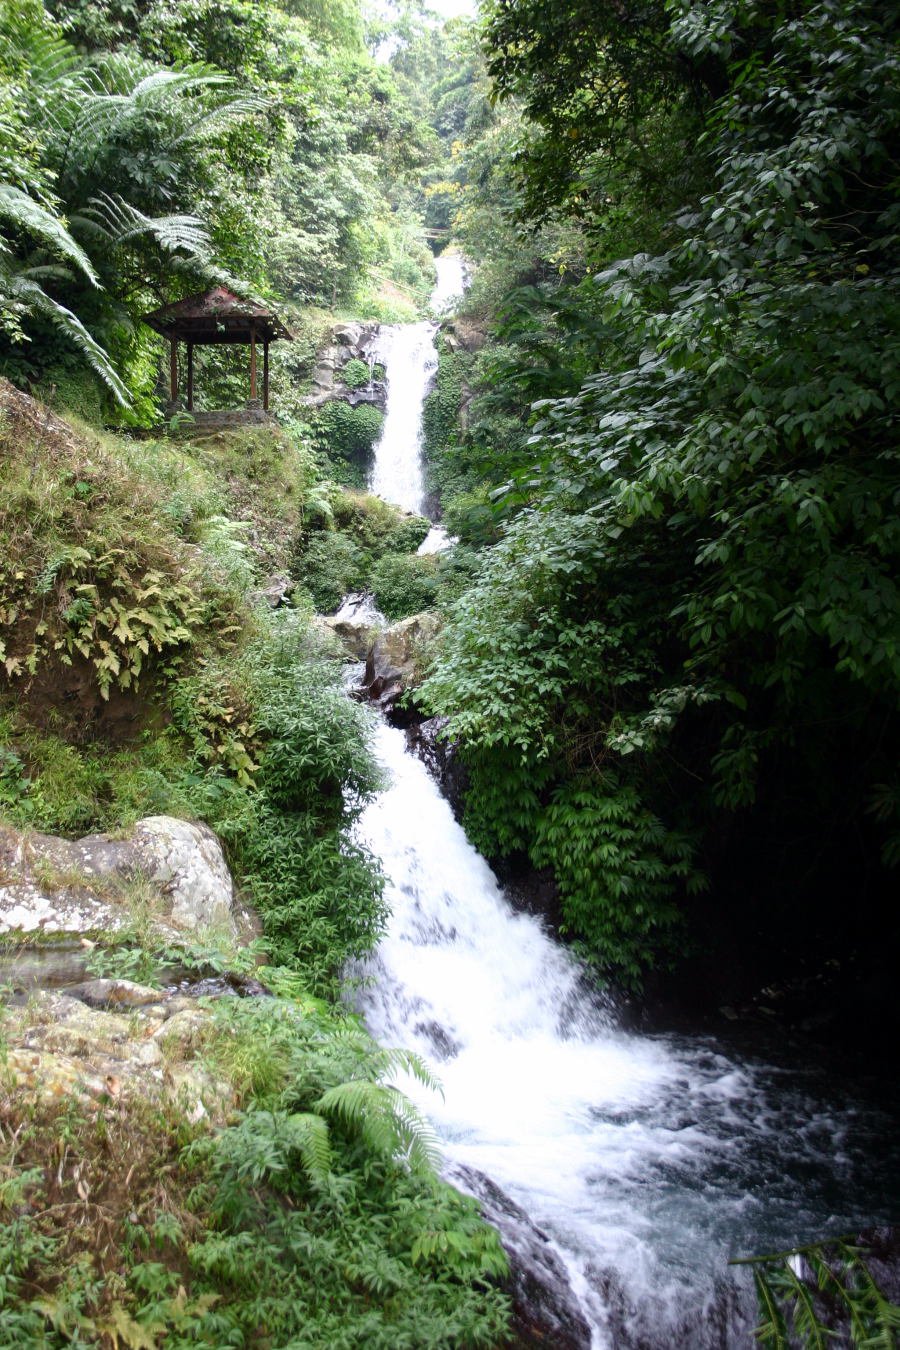 Overall view of three tiers of the falls